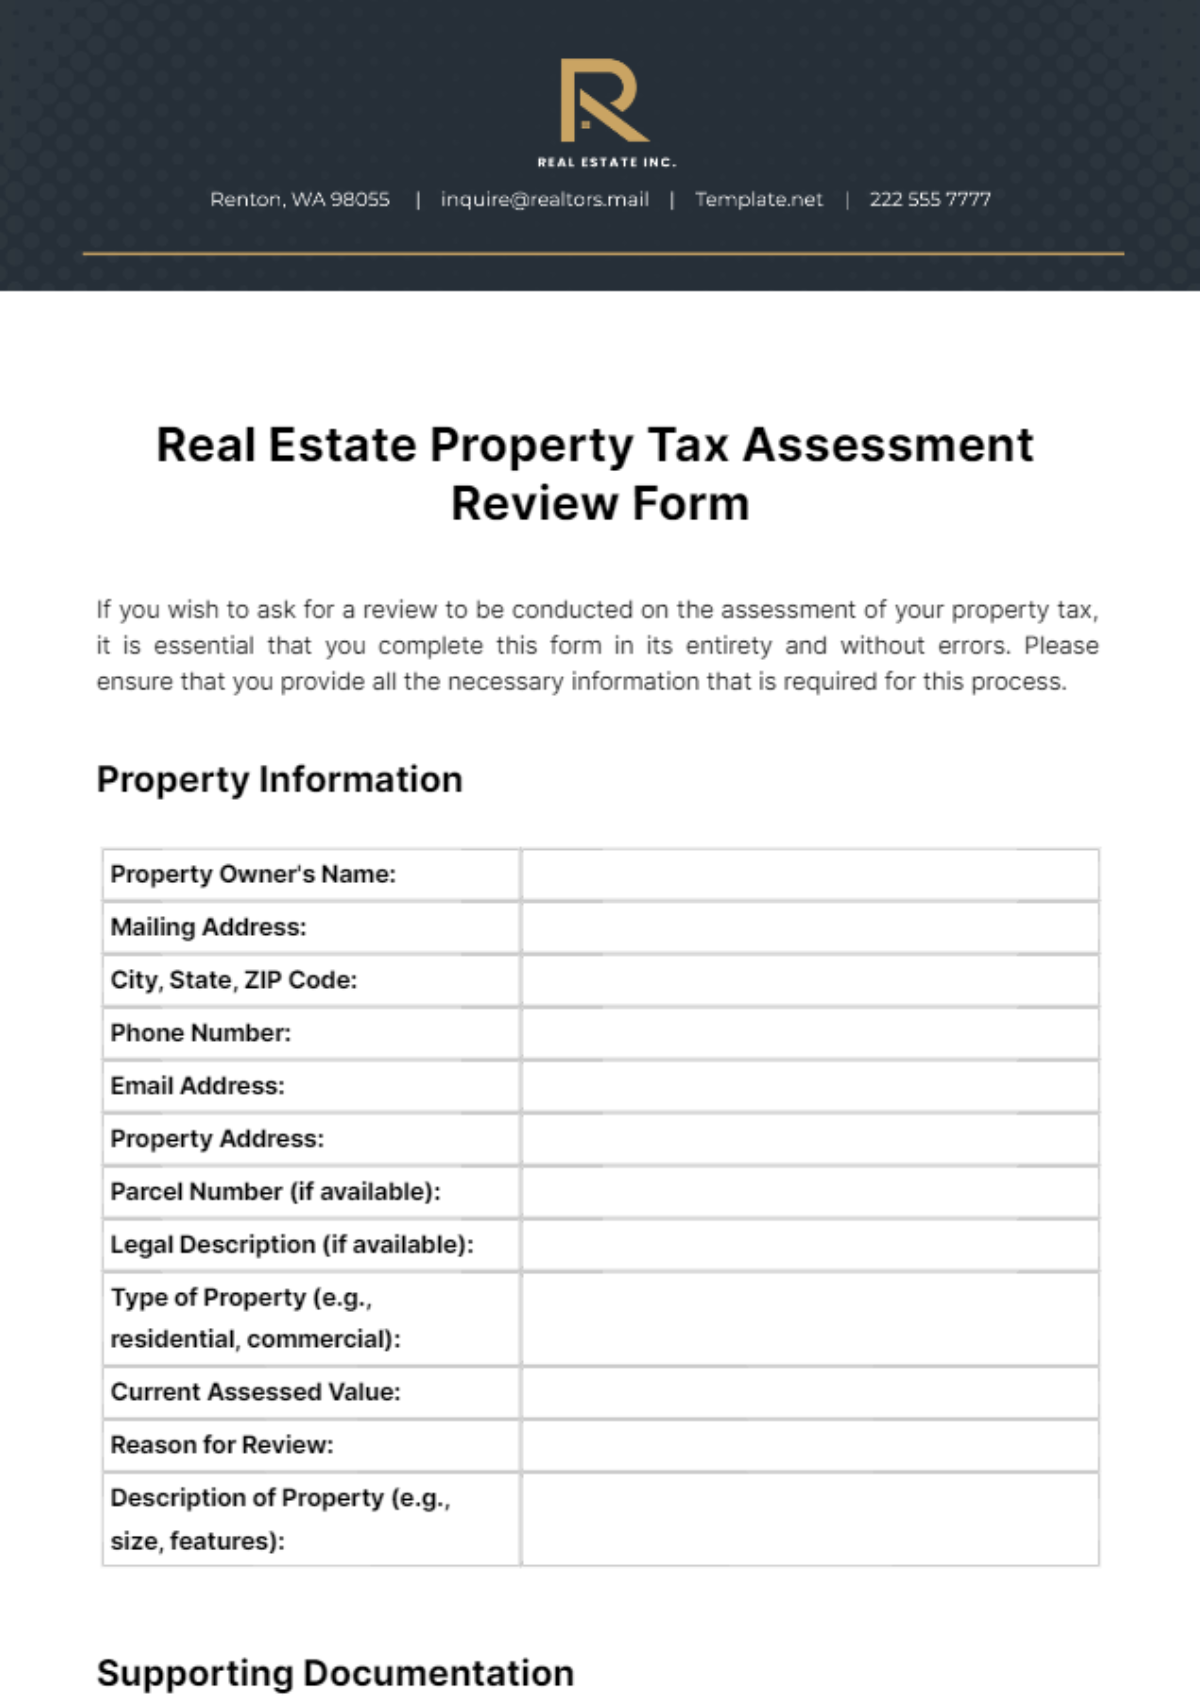 Real Estate Property Tax Assessment Review Form Template